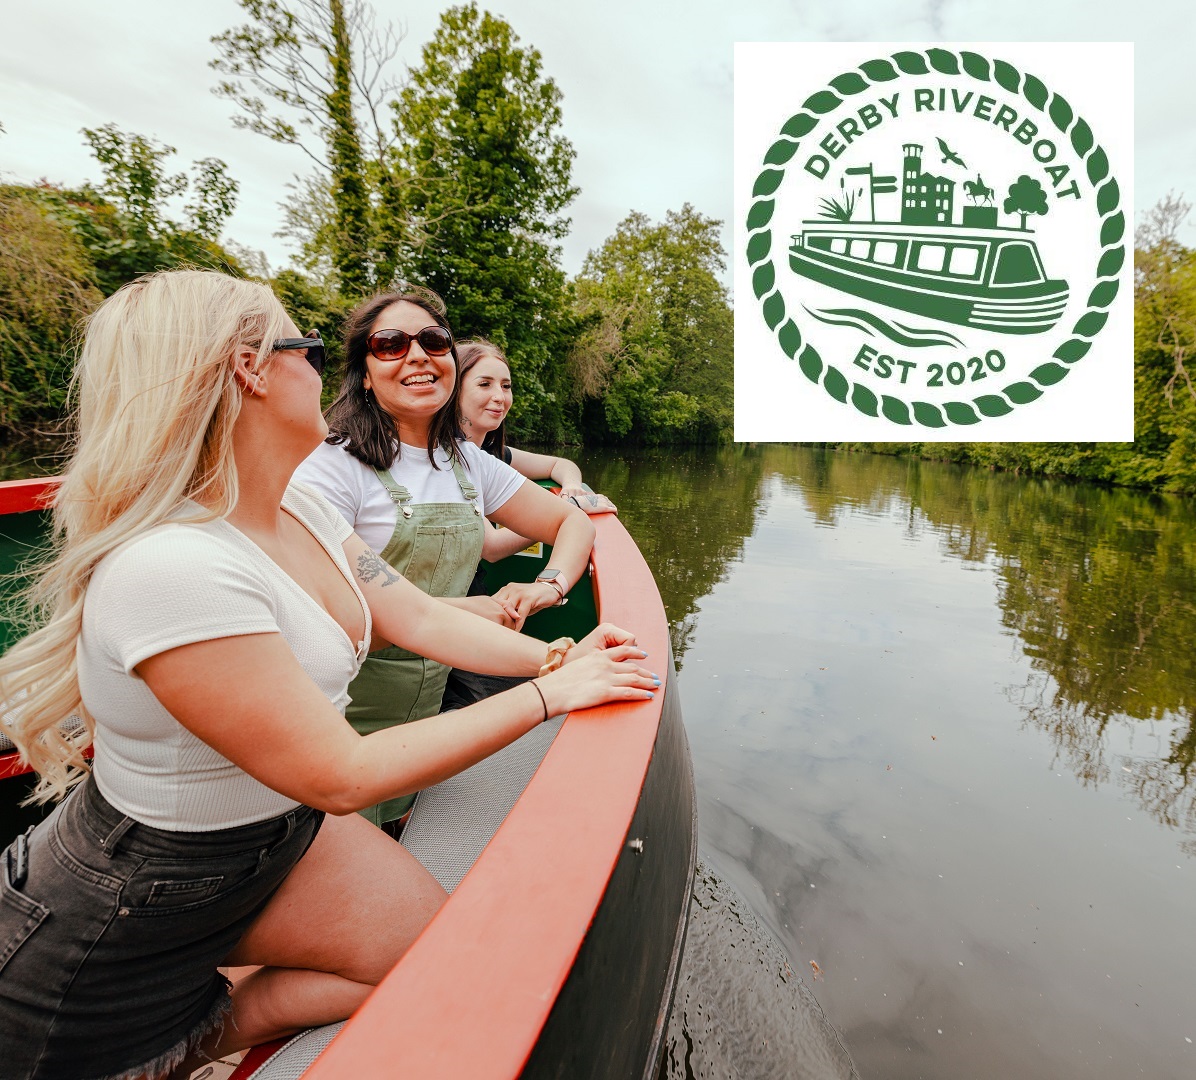 ⚓Thinking of taking a @DerbyRiverboat trip? You can enjoy.... 🌊Scenic exploration 🌊Historical insights 🌊Relaxation & recreation The riverboat trip provides a peaceful retreat where you can recharge. Book your trip now ⬇️ ow.ly/fZA050R2Ype #DerbyUK #Riverboat